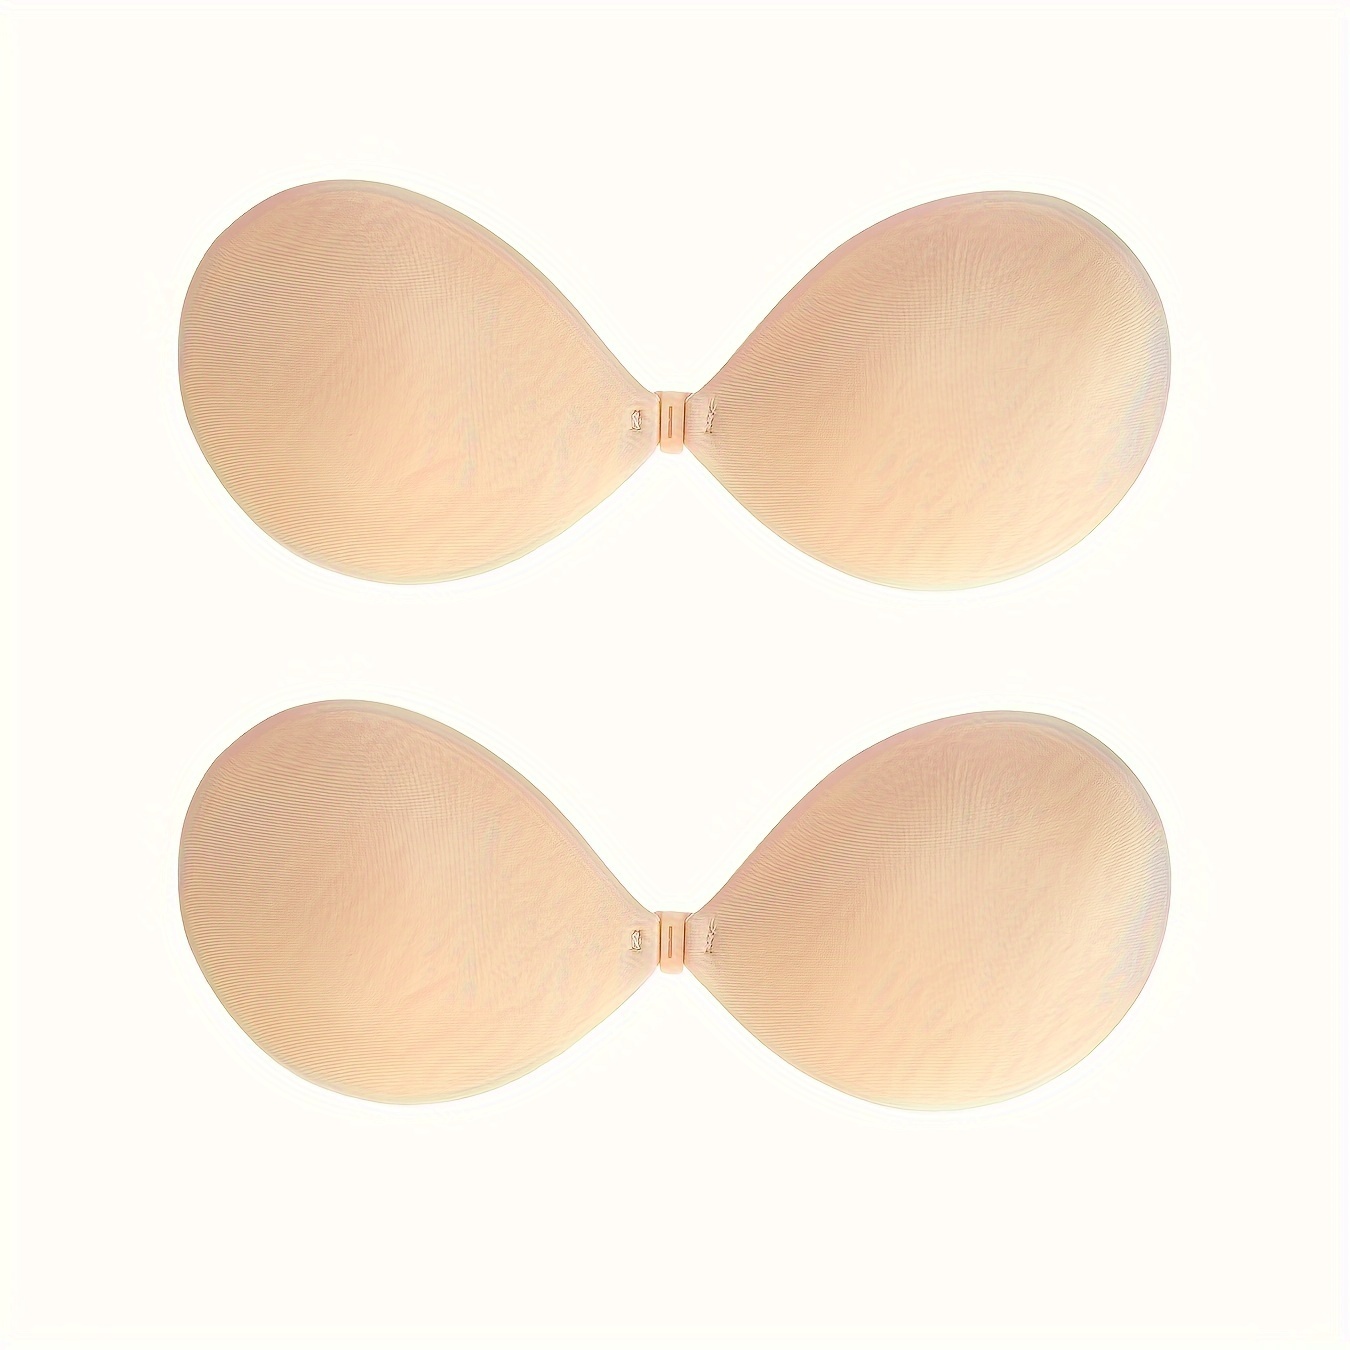 ASTOUND Adhesive Bra, Silicone Sticky Silicone Push Up Bra Pads Price in  India - Buy ASTOUND Adhesive Bra, Silicone Sticky Silicone Push Up Bra Pads  online at